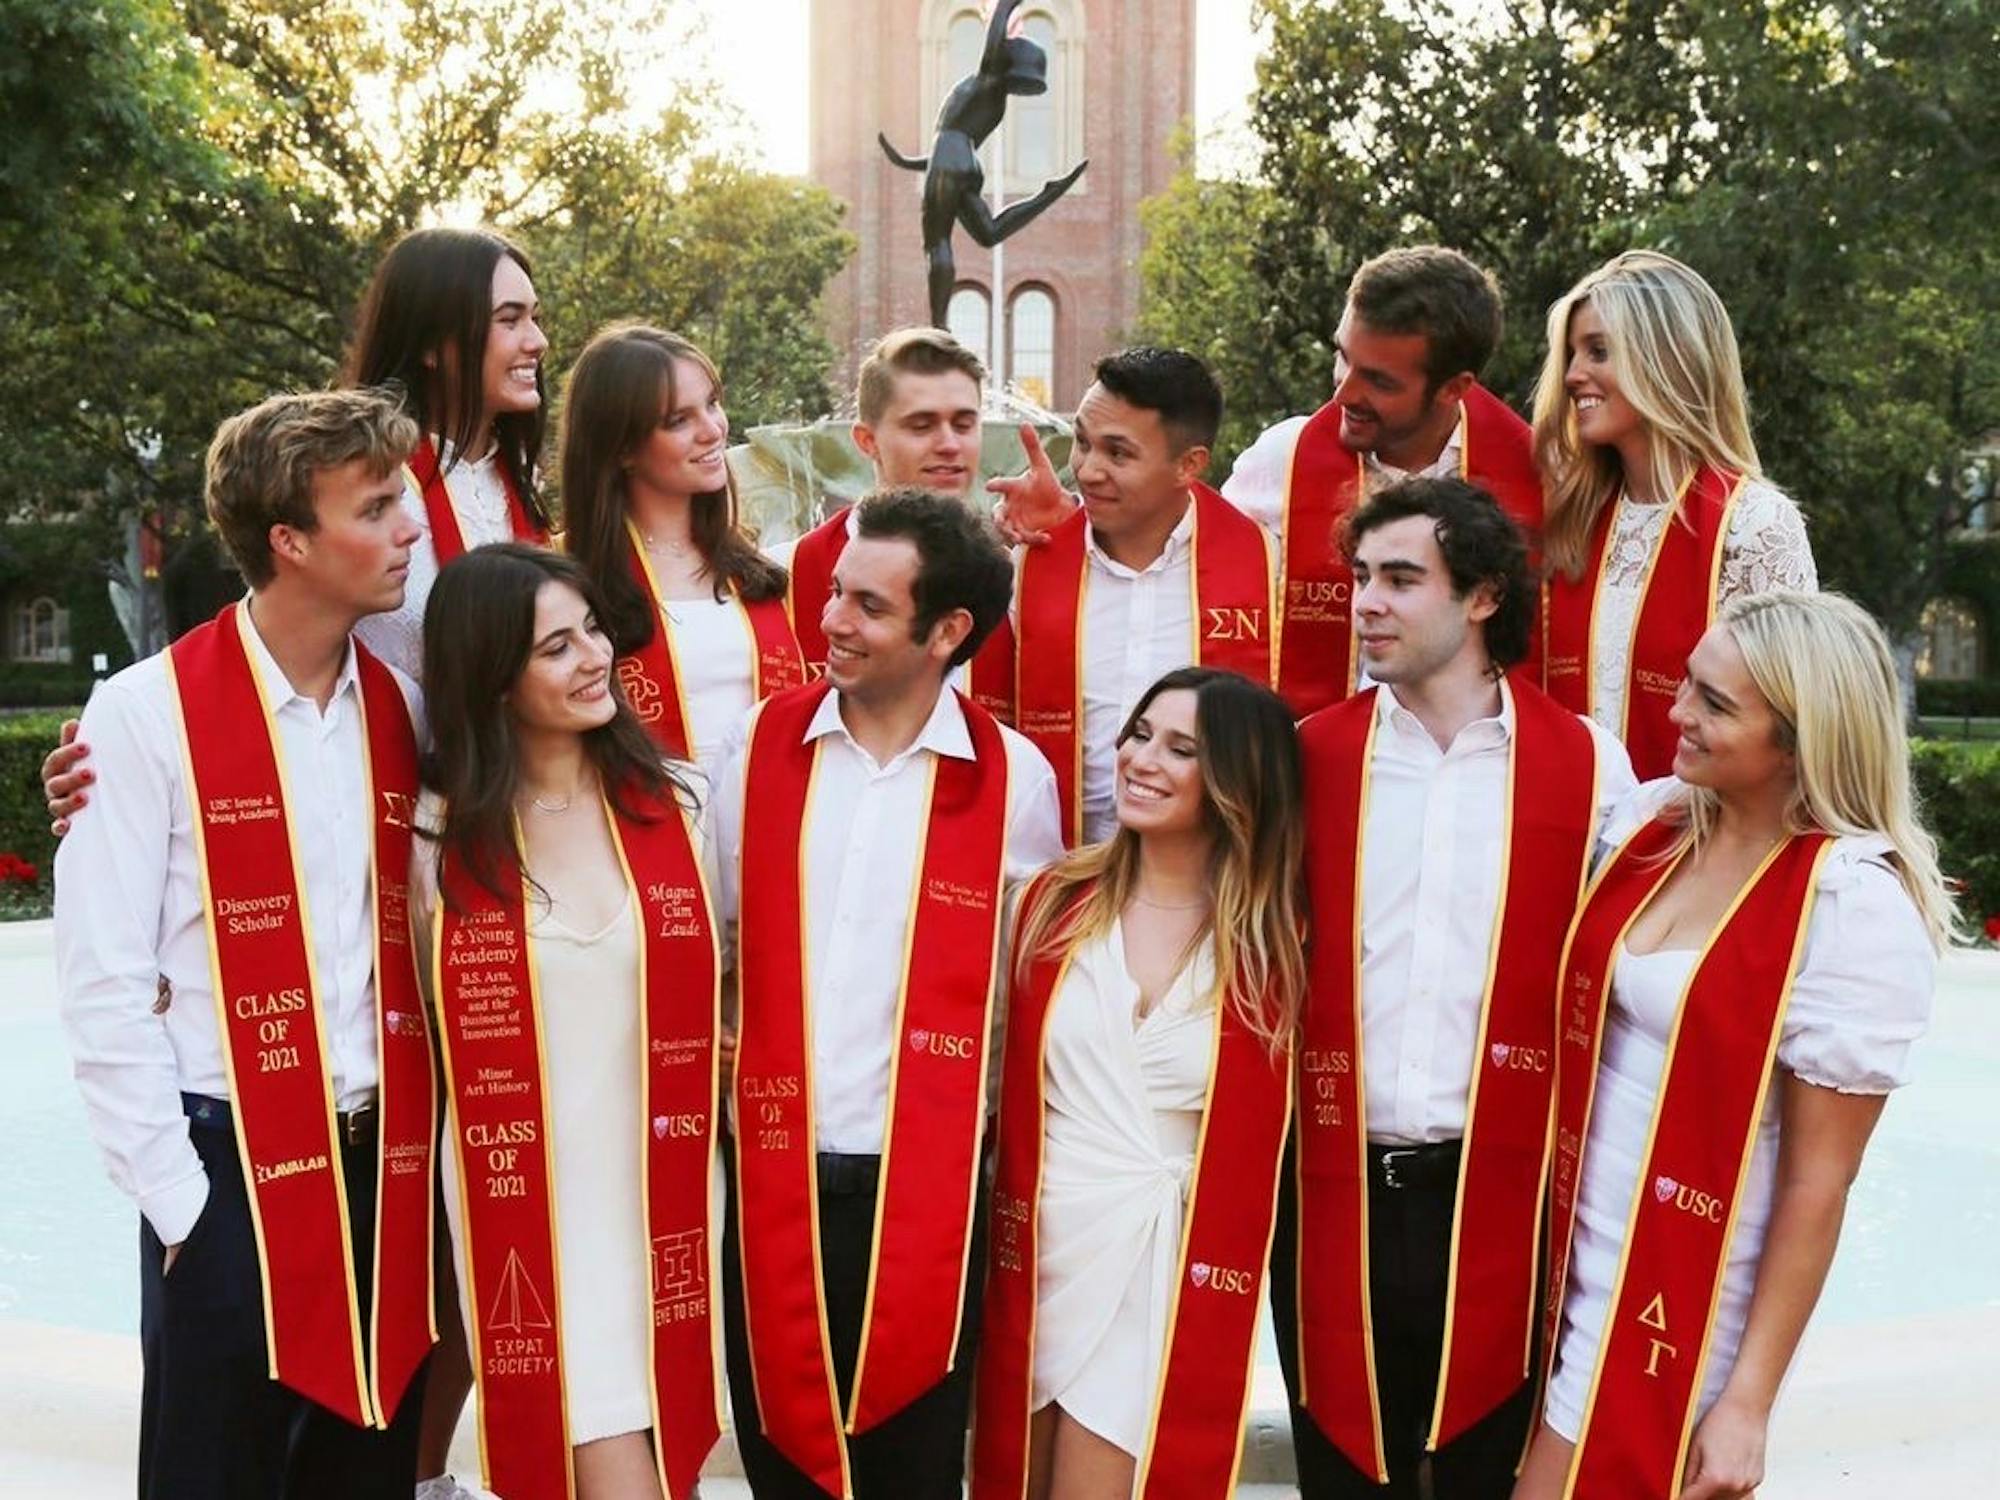 Group of graduating students wearing white and red sashes